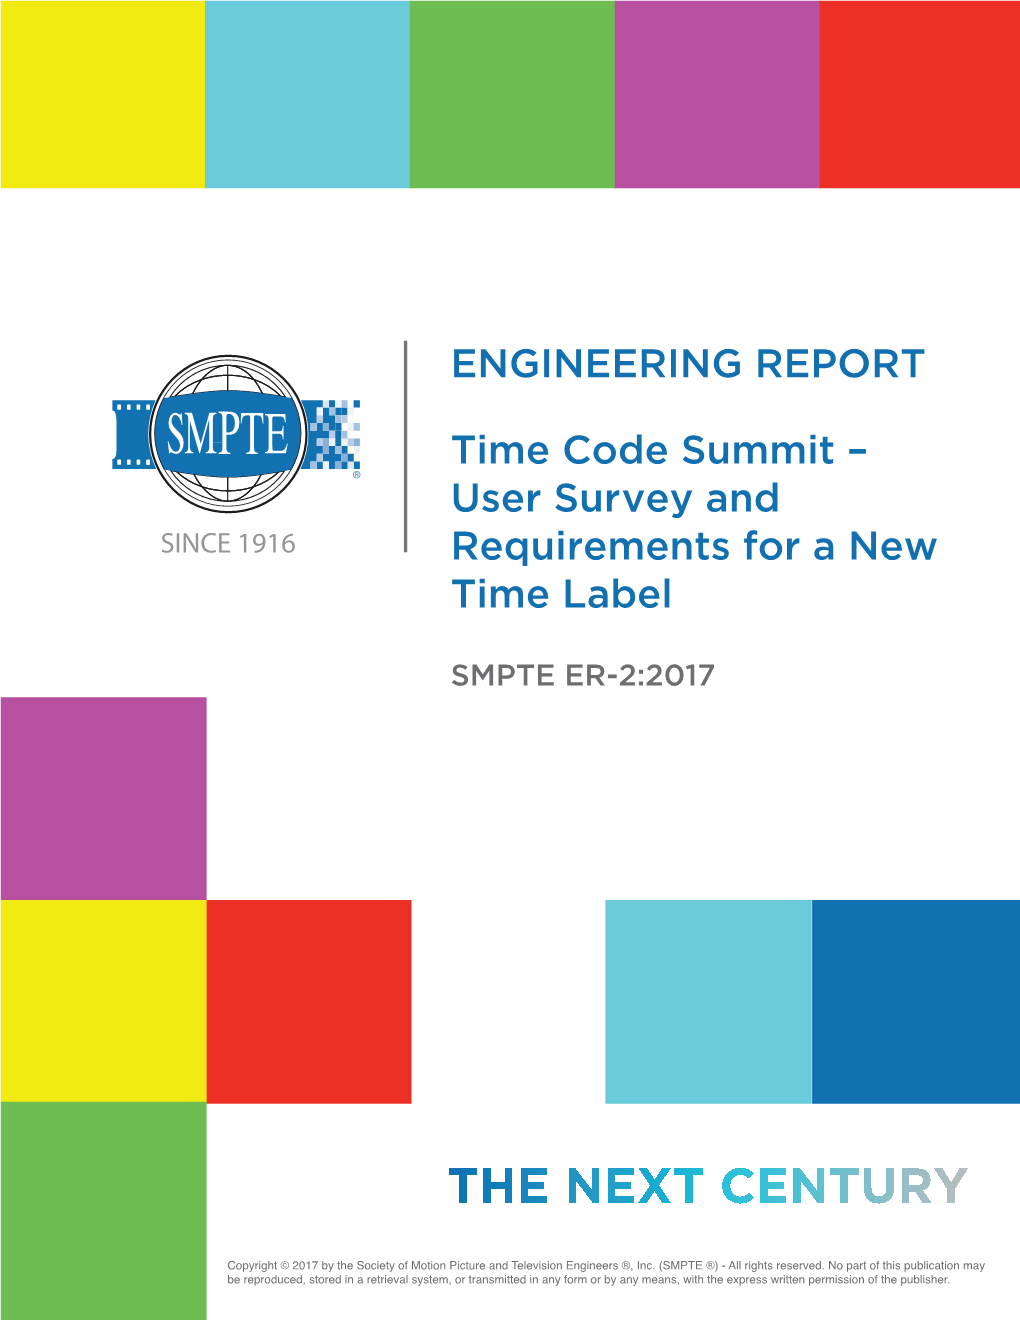 ENGINEERING REPORT Time Code Summit – User Survey And